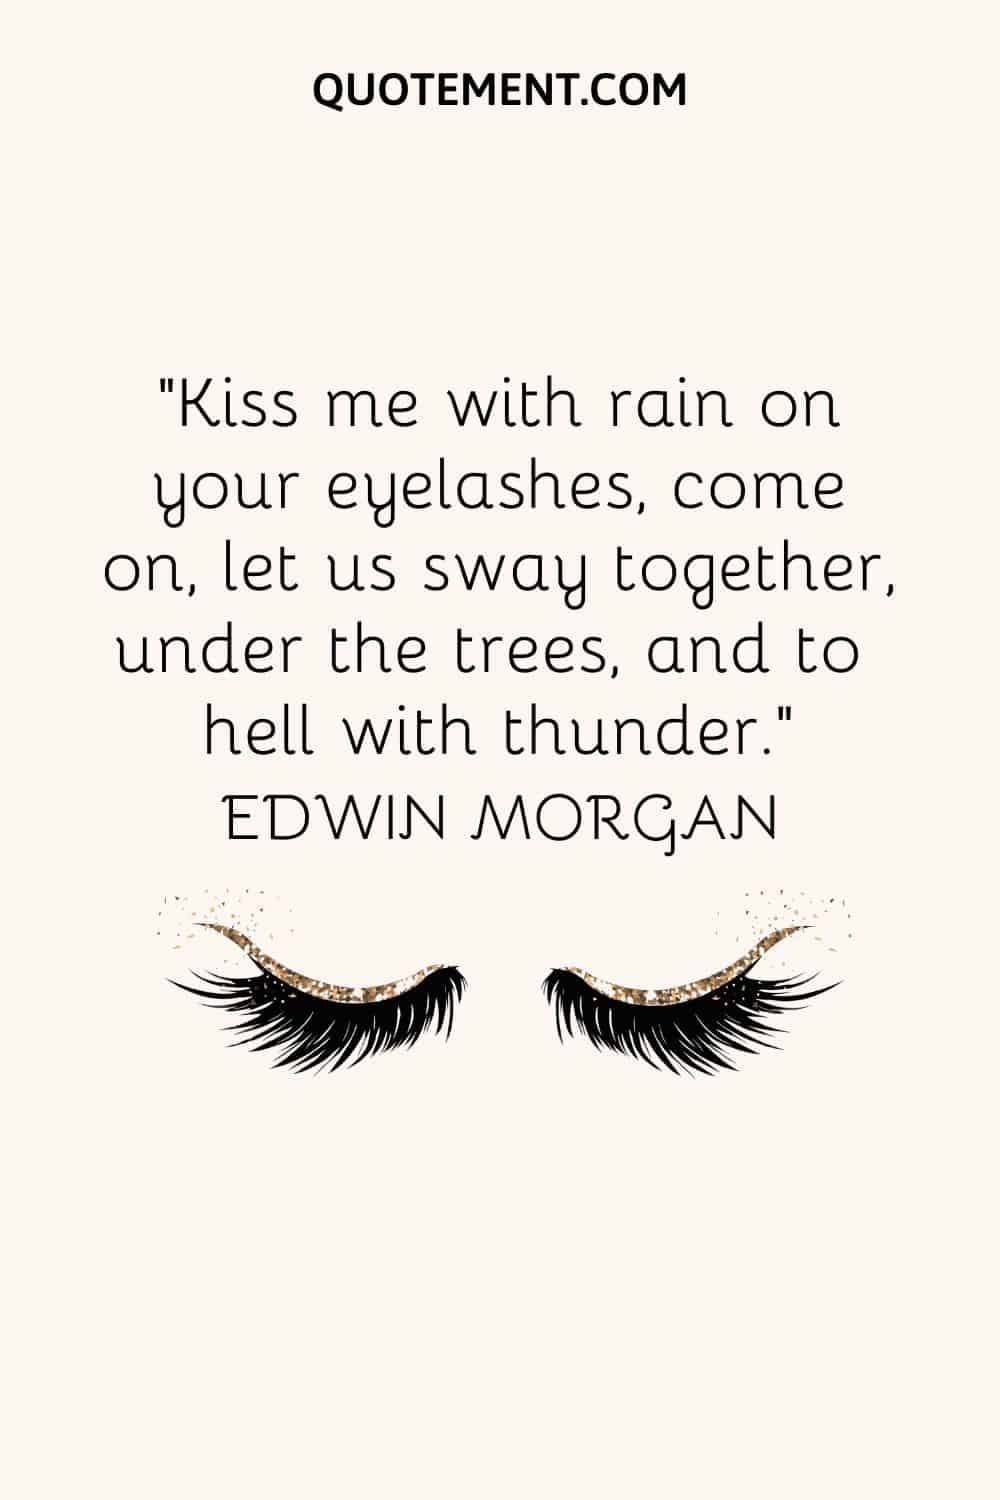 Kiss me with rain on your eyelashes, come on, let us sway together, under the trees, and to hell with thunder